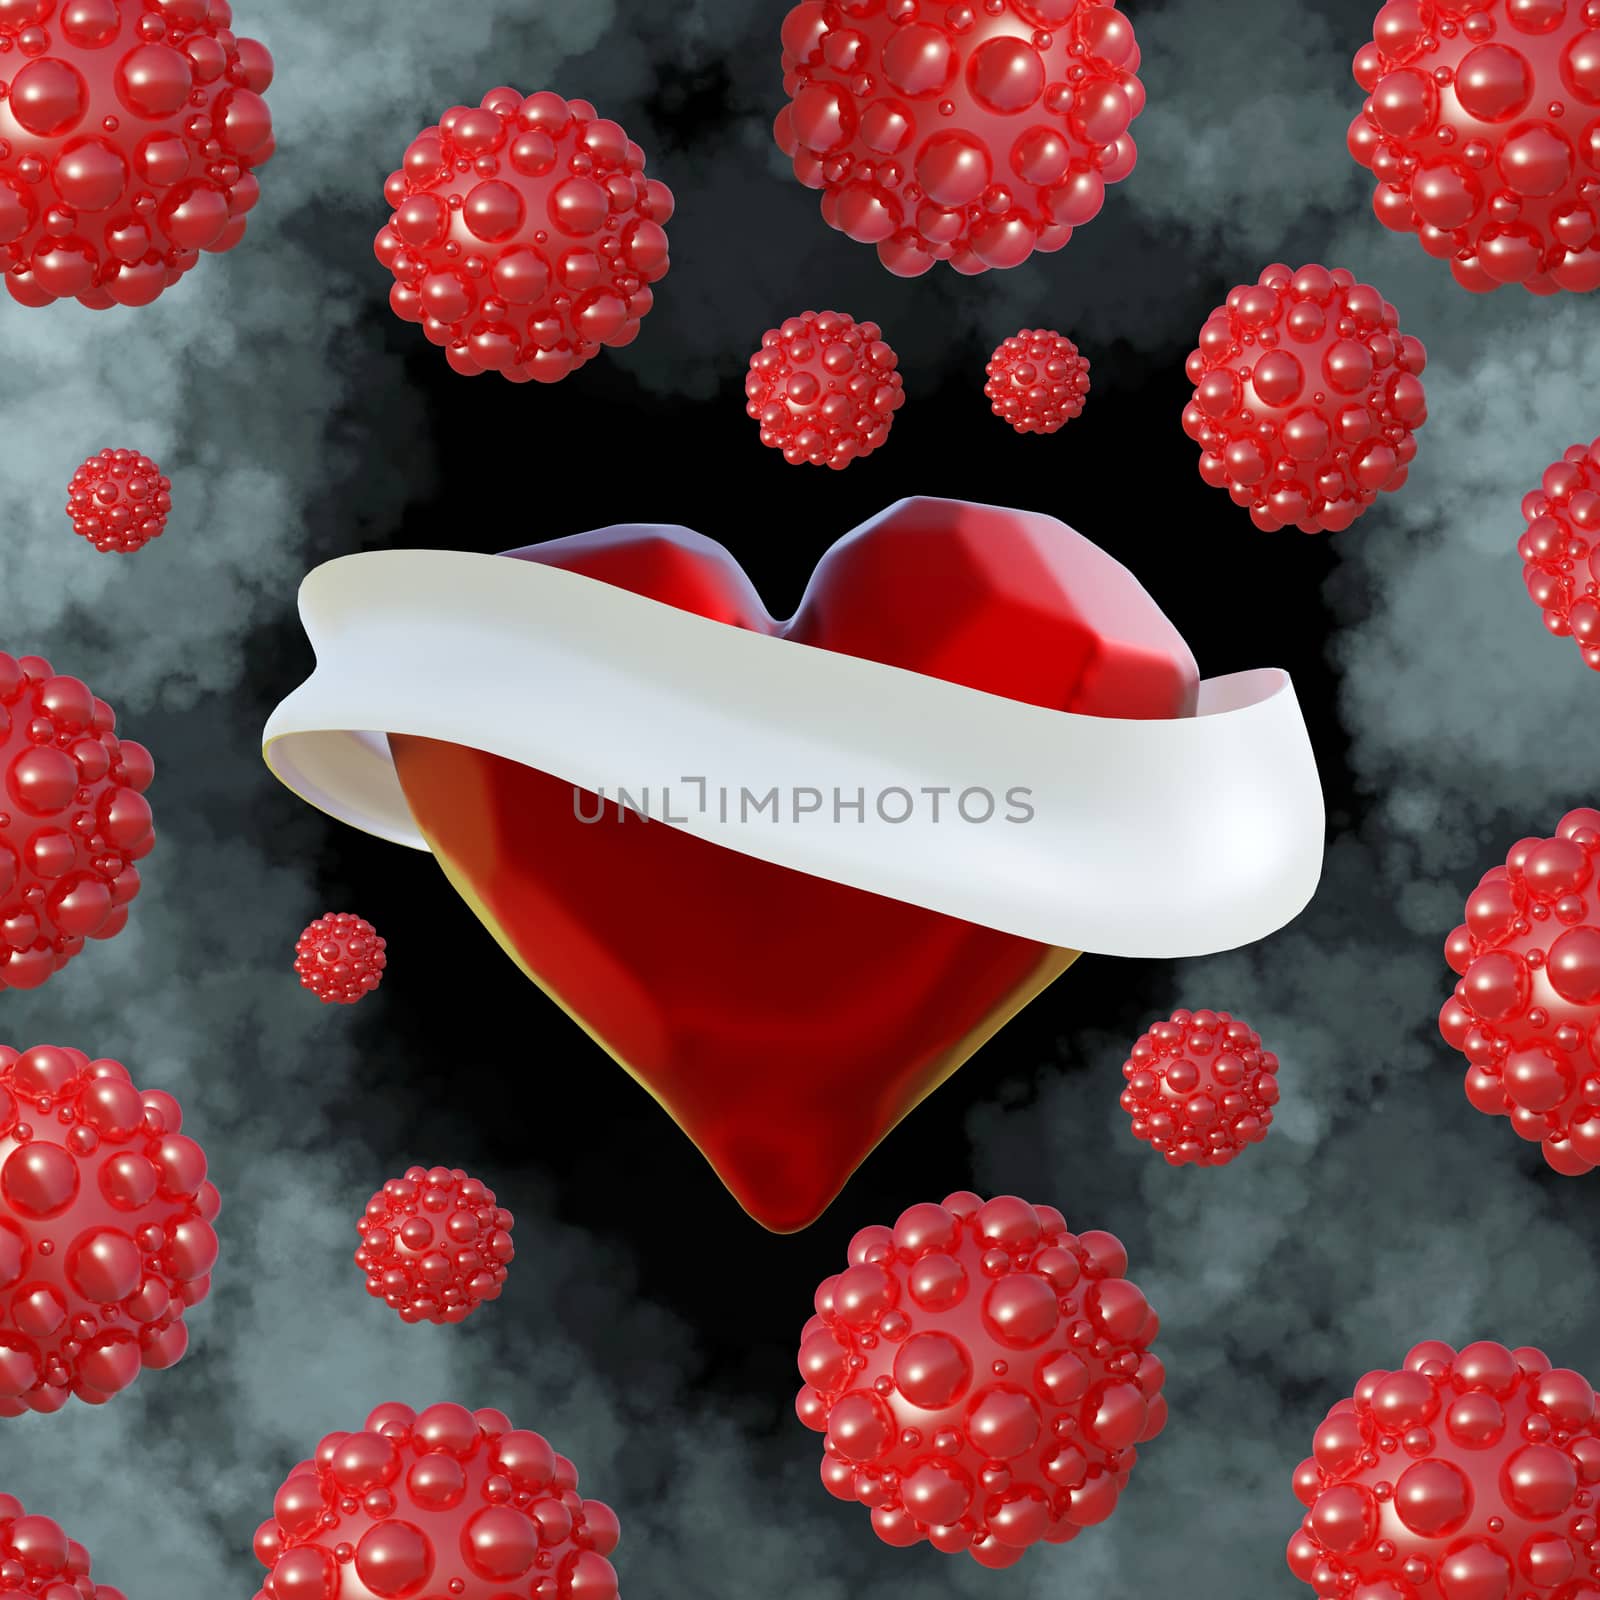 Flying red chopped heart with the white ribbon and the molecular spheres around. Copyspace for text Valentines day 3d illustration.